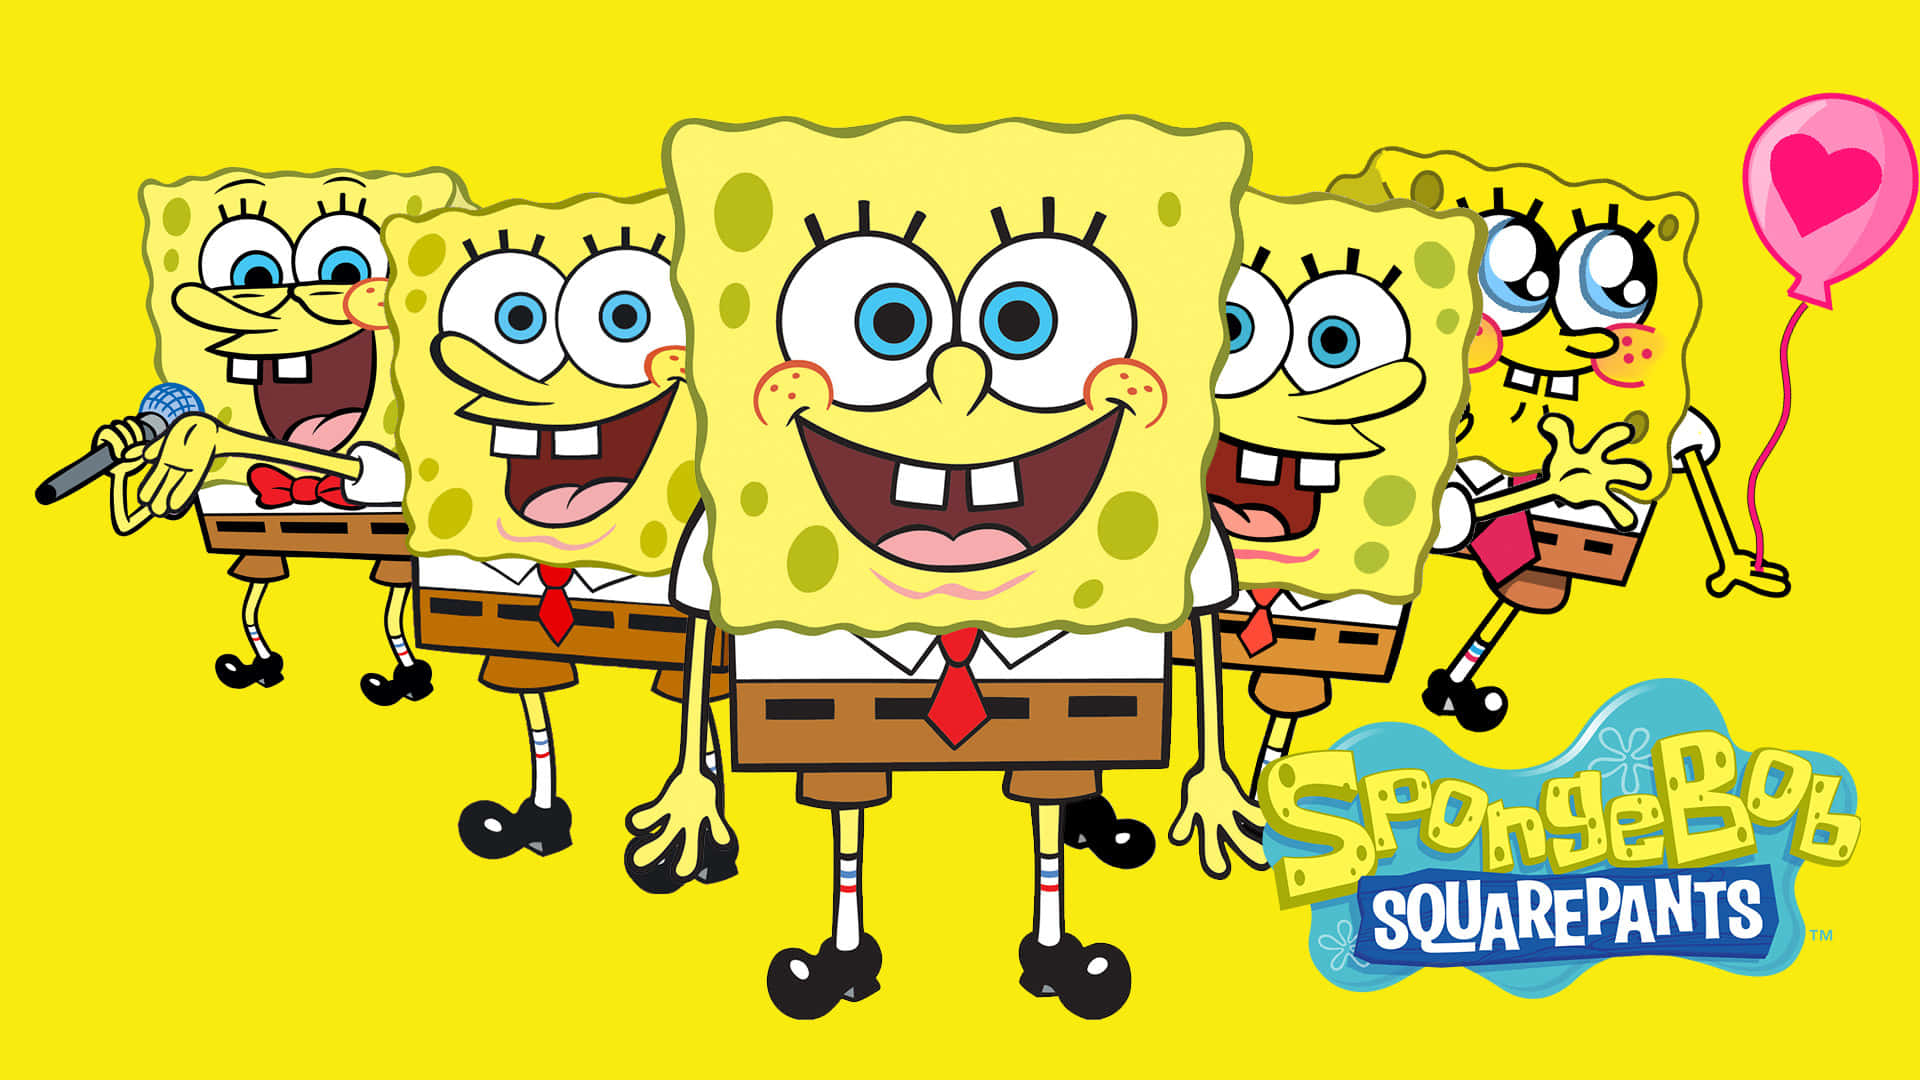 All your favorite Spongebob Characters, Ready to bring you a smile. Wallpaper